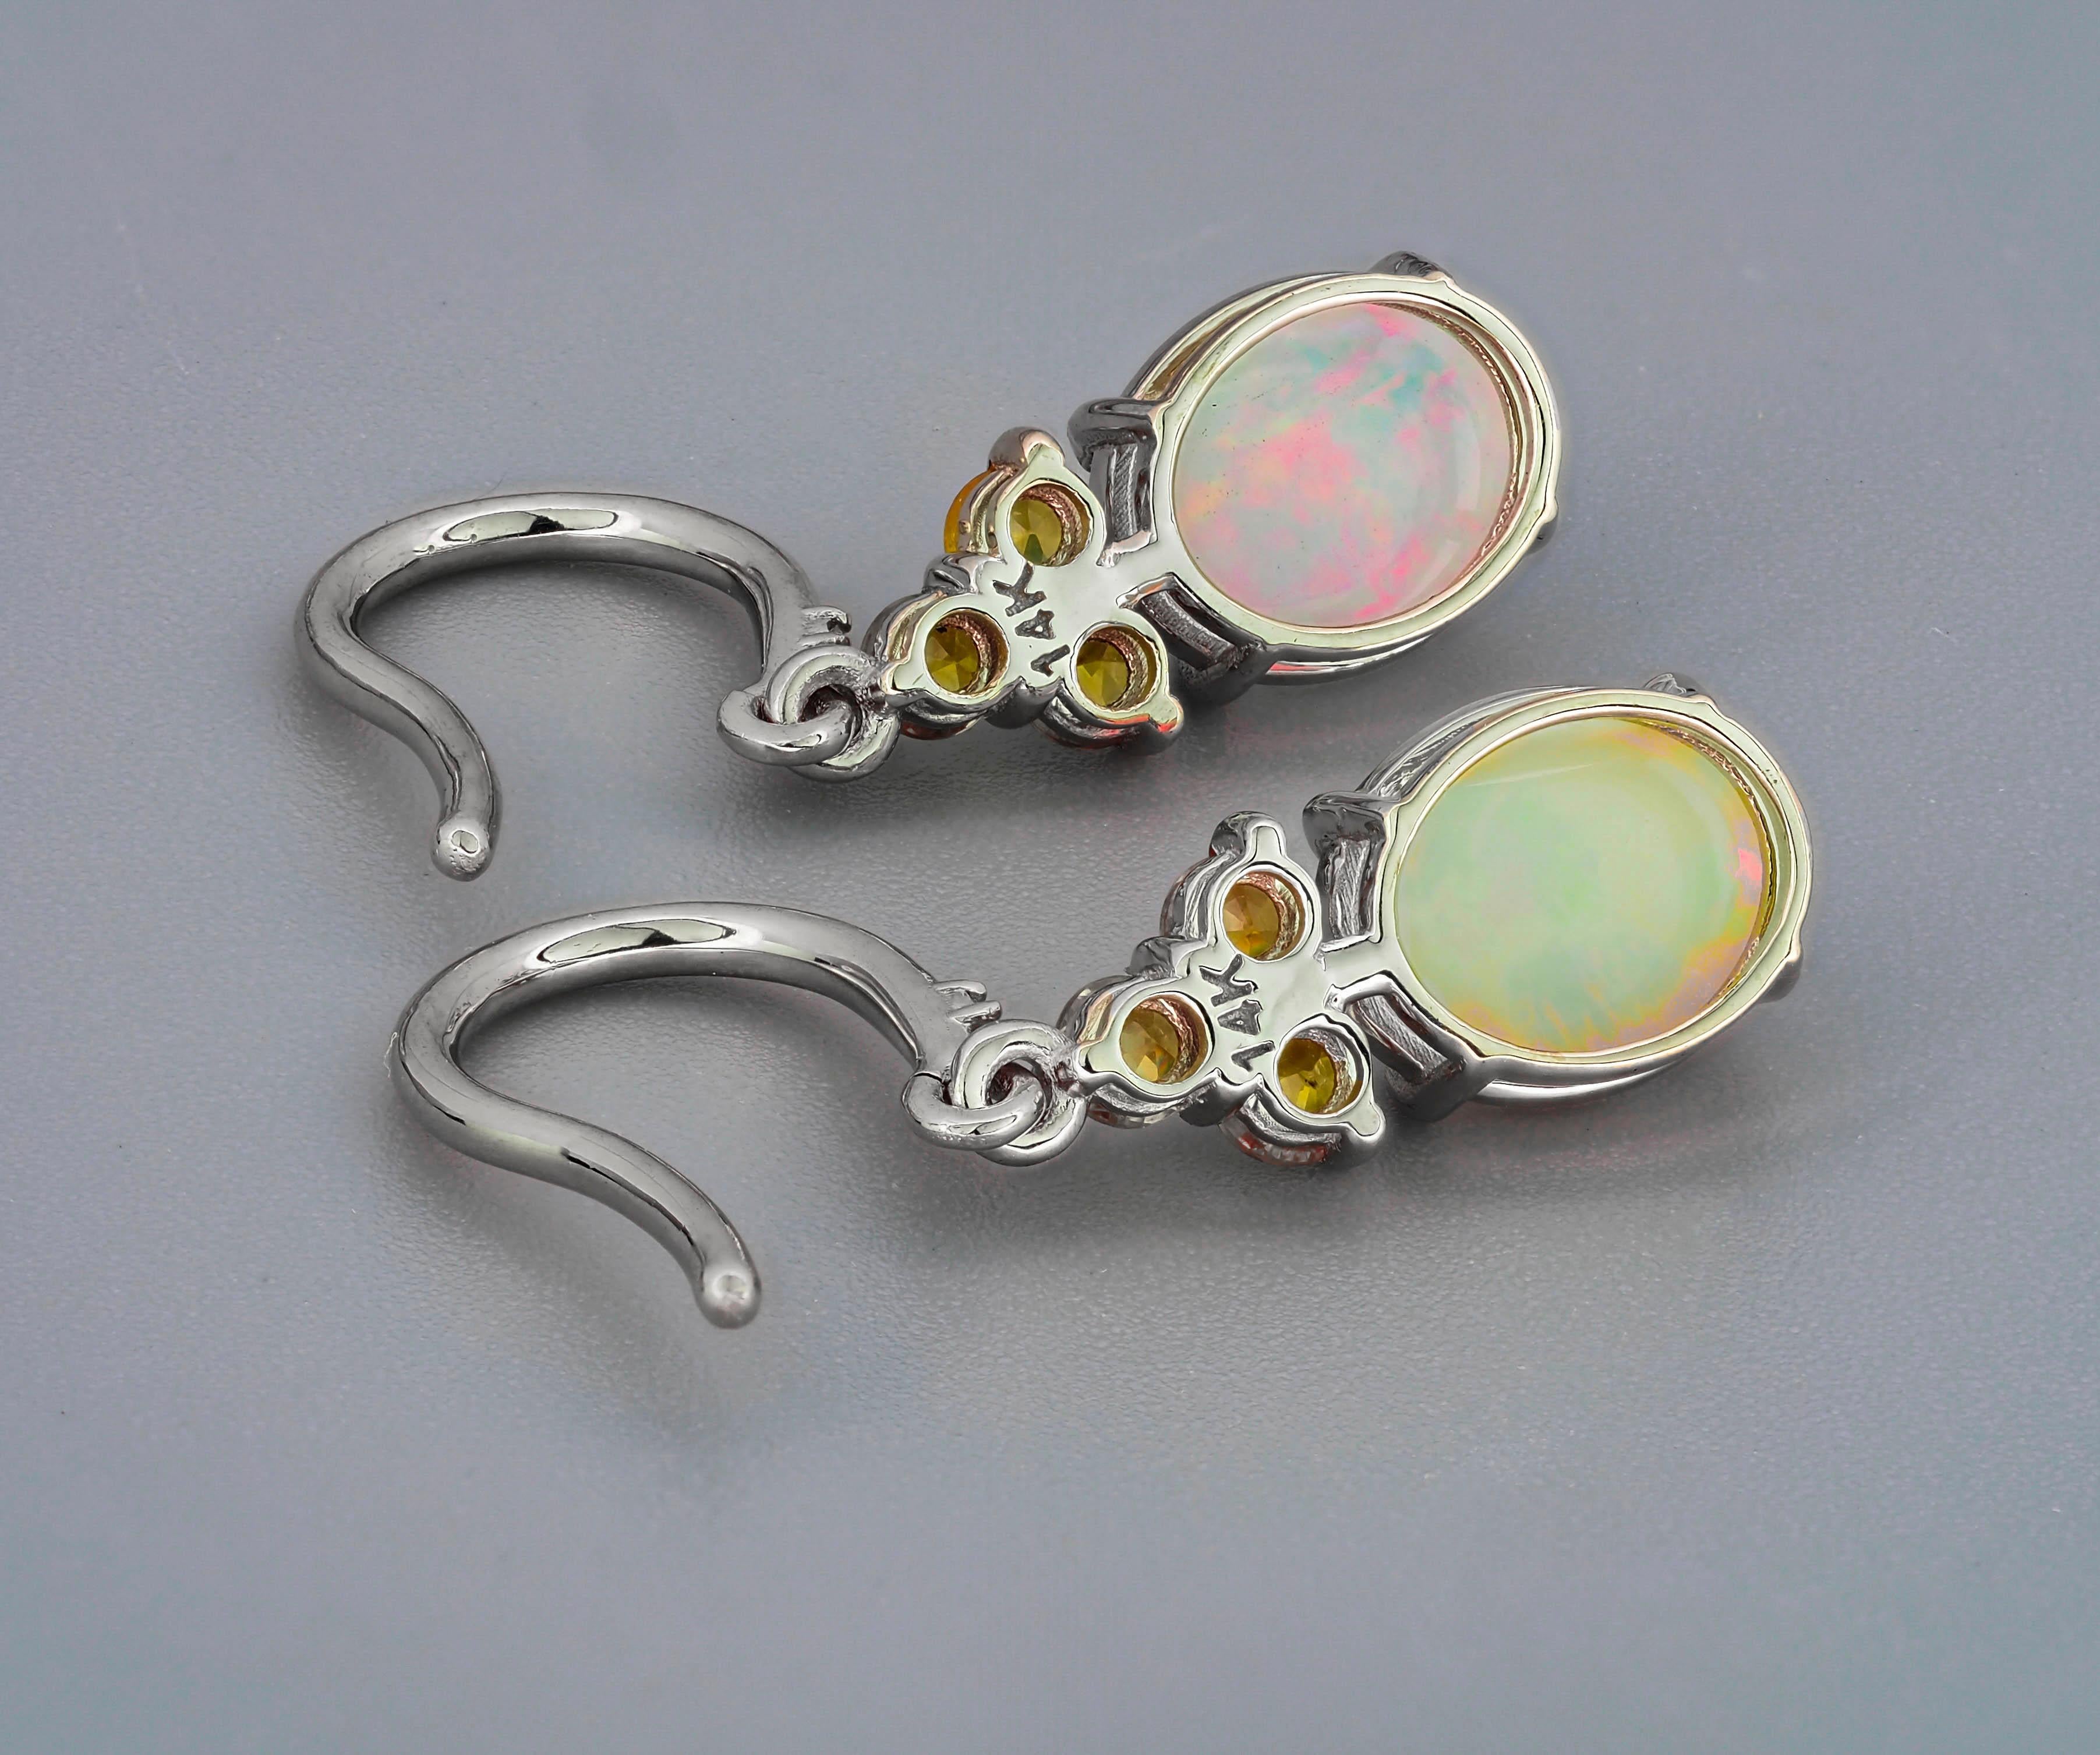 14 kt solid gold earrings with central natural opal, diamonds and sapphires. October birthstone.
Size: 25 x 6 mm.
Total weight: 2.5 g.

Central stones: Natural opals 2 pieces
Weight: approx 5.00 ct in total (8.5 x 6 mm each), oval cut
Clarity: